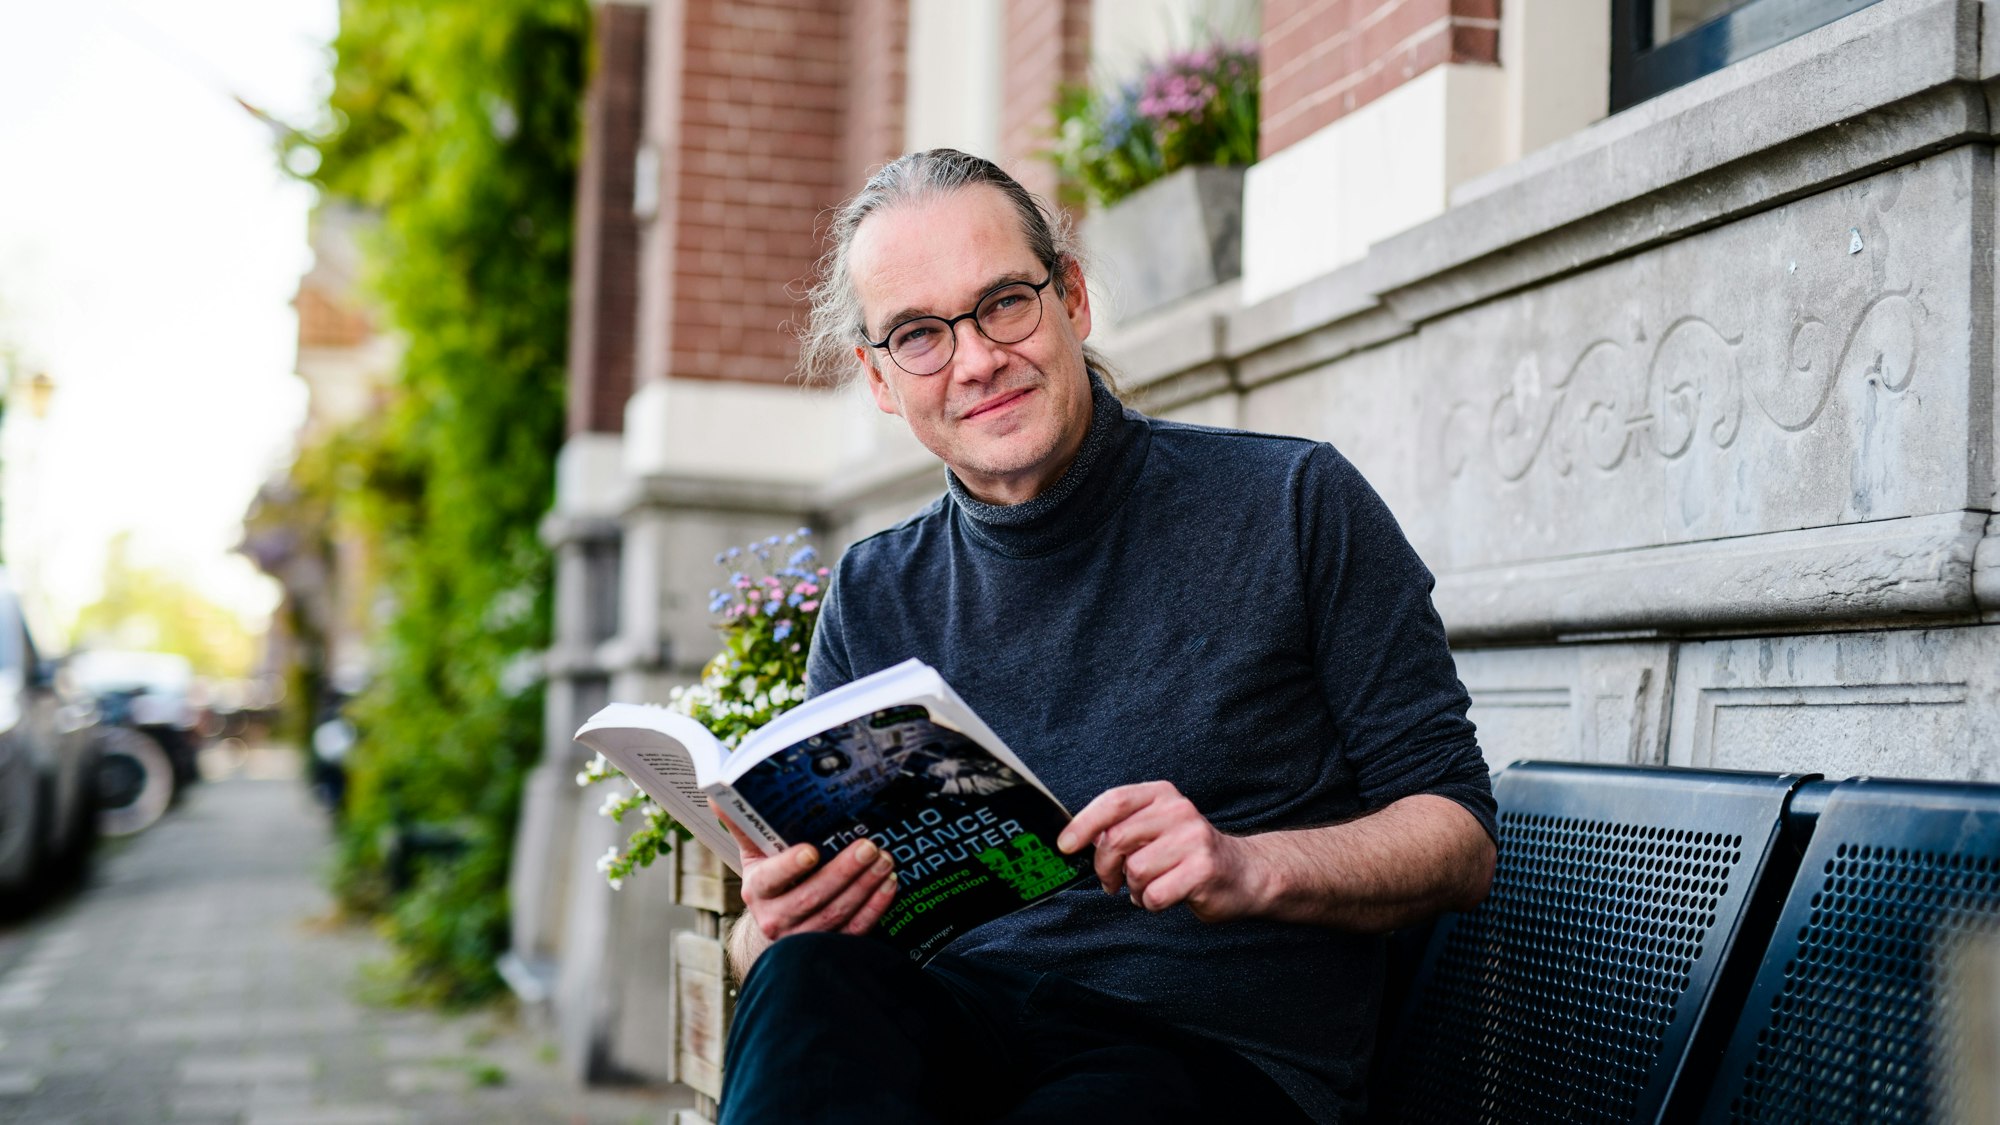 Edwin sitting on a bench in front of an Amsterdam house with a book in his hands.